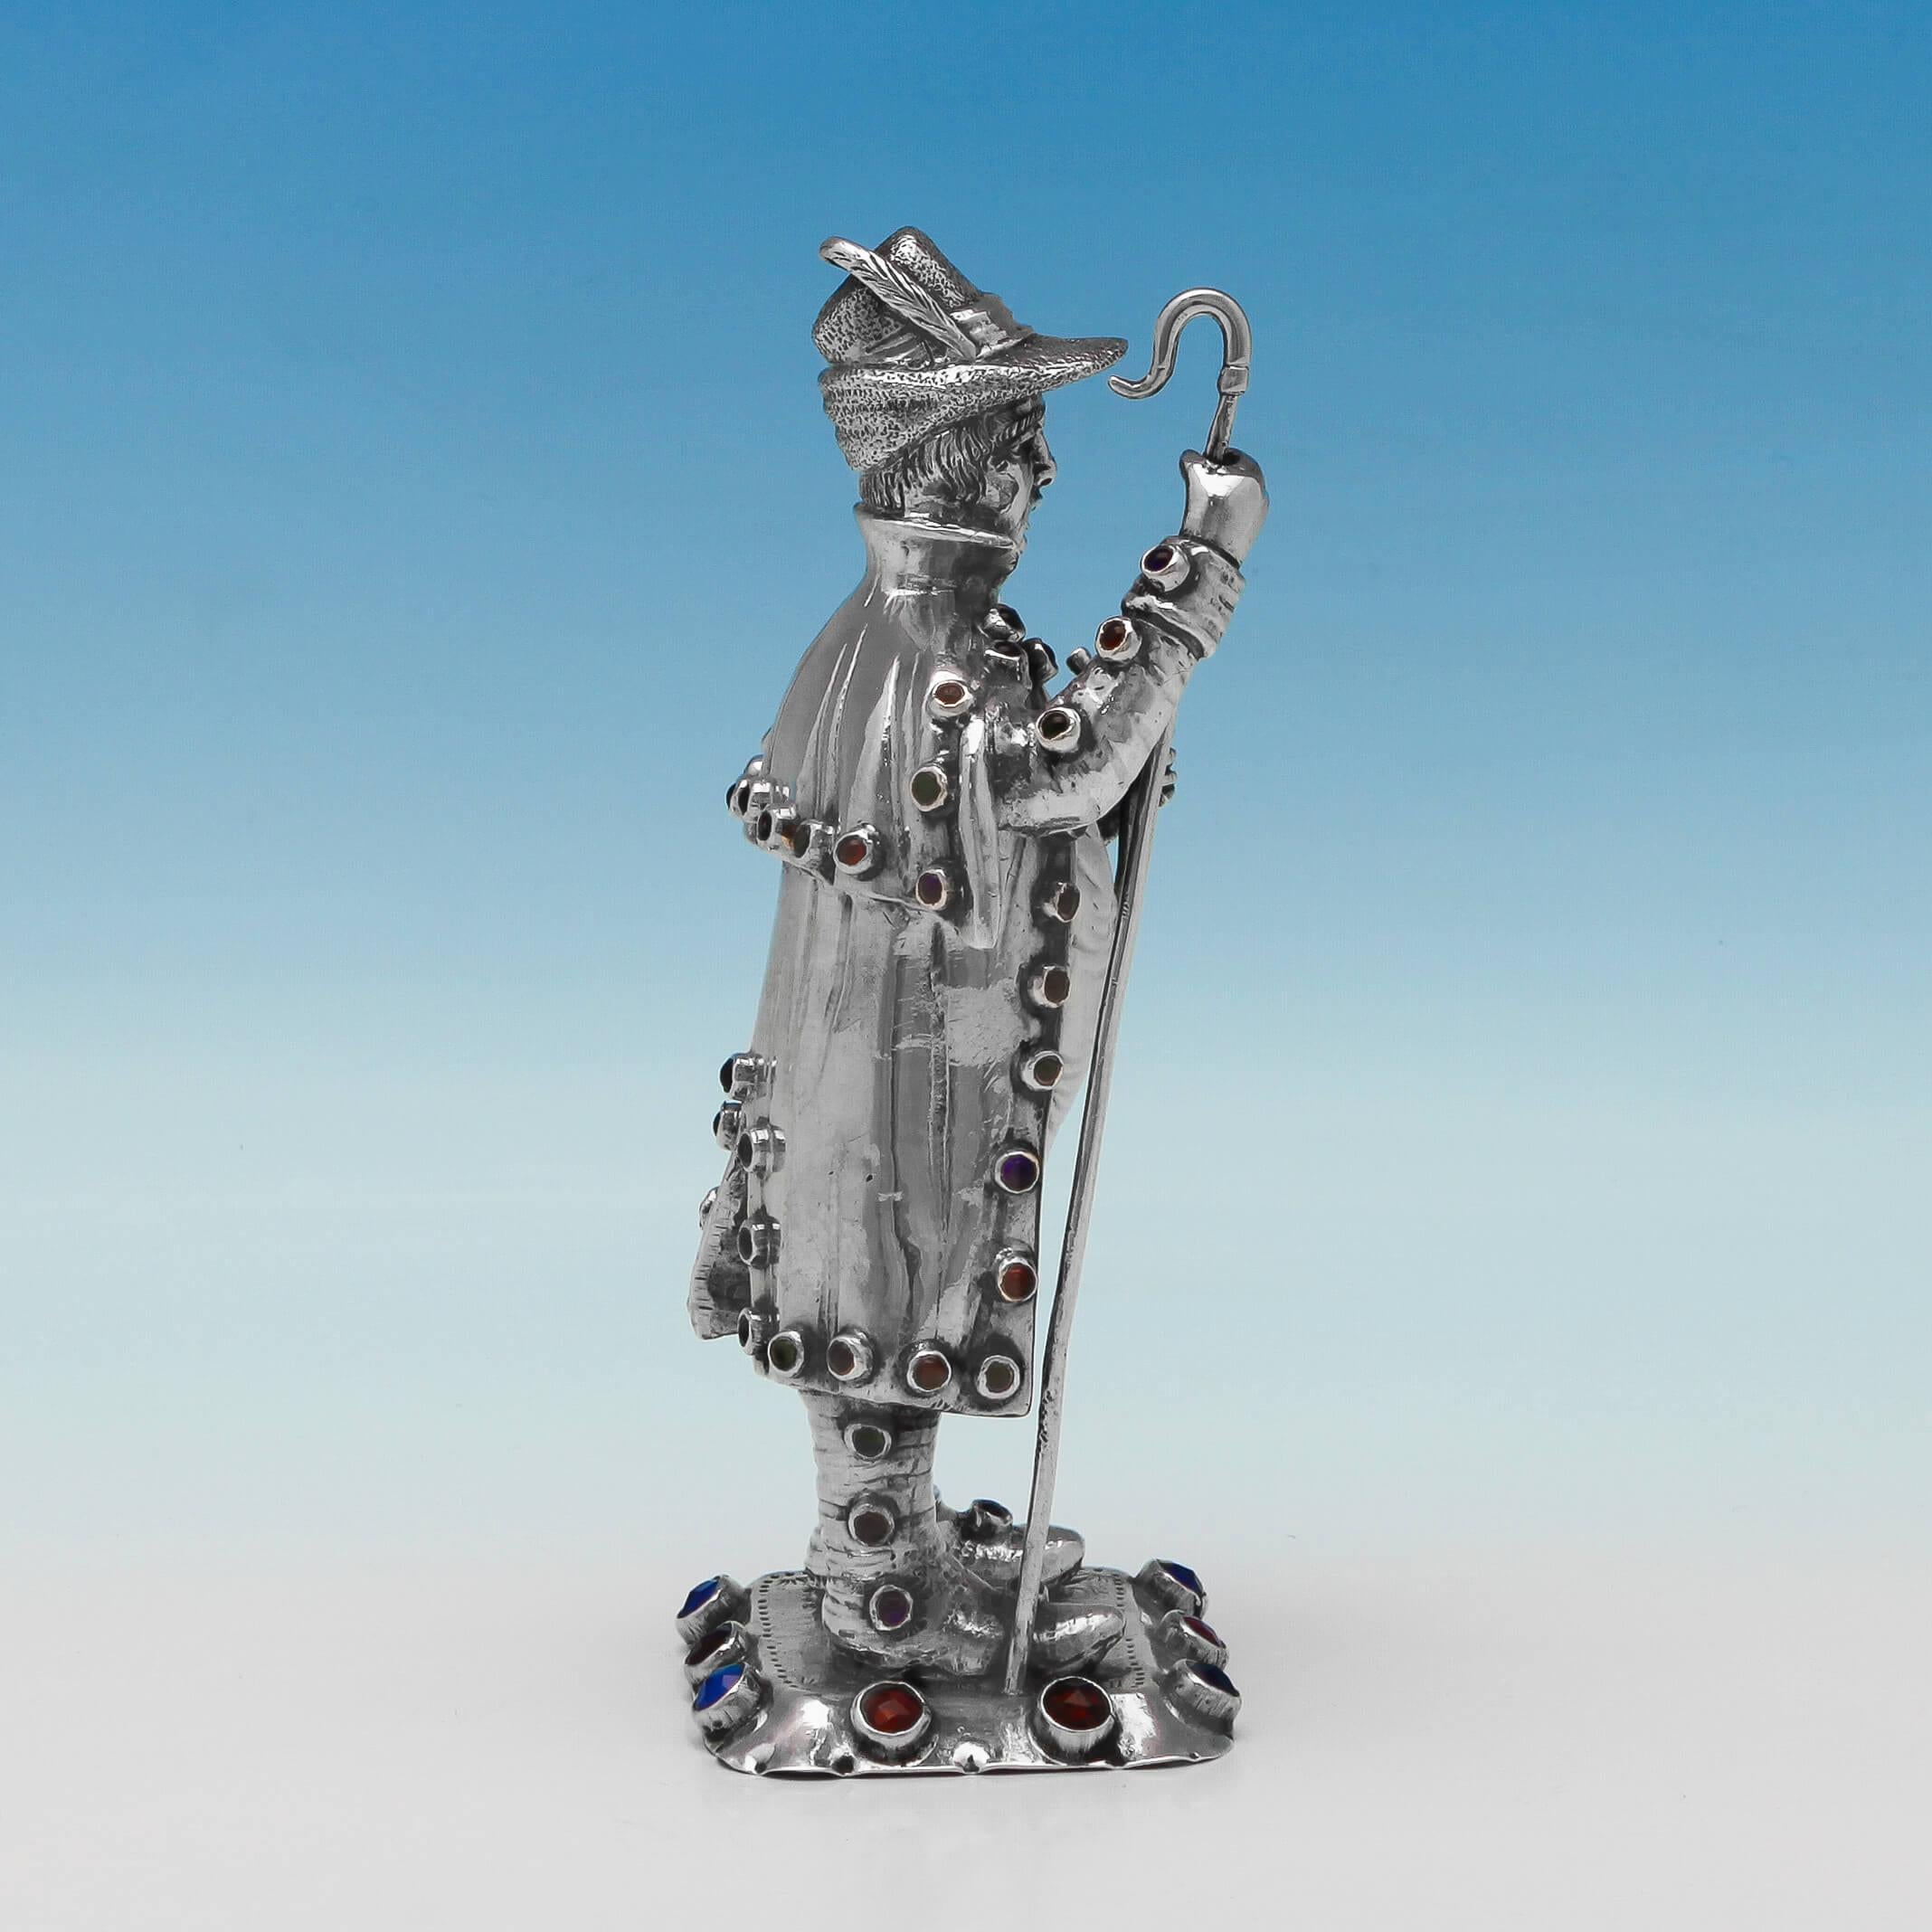 Carrying import marks for London, 1902 by Edwin Thompson Bryant, this handsome, antique silver model of a Gentleman, is wonderfully made with red and blue set paste to the Stand and clothes. The model measures 6.25 inches (16cm) tall, by 3 inches